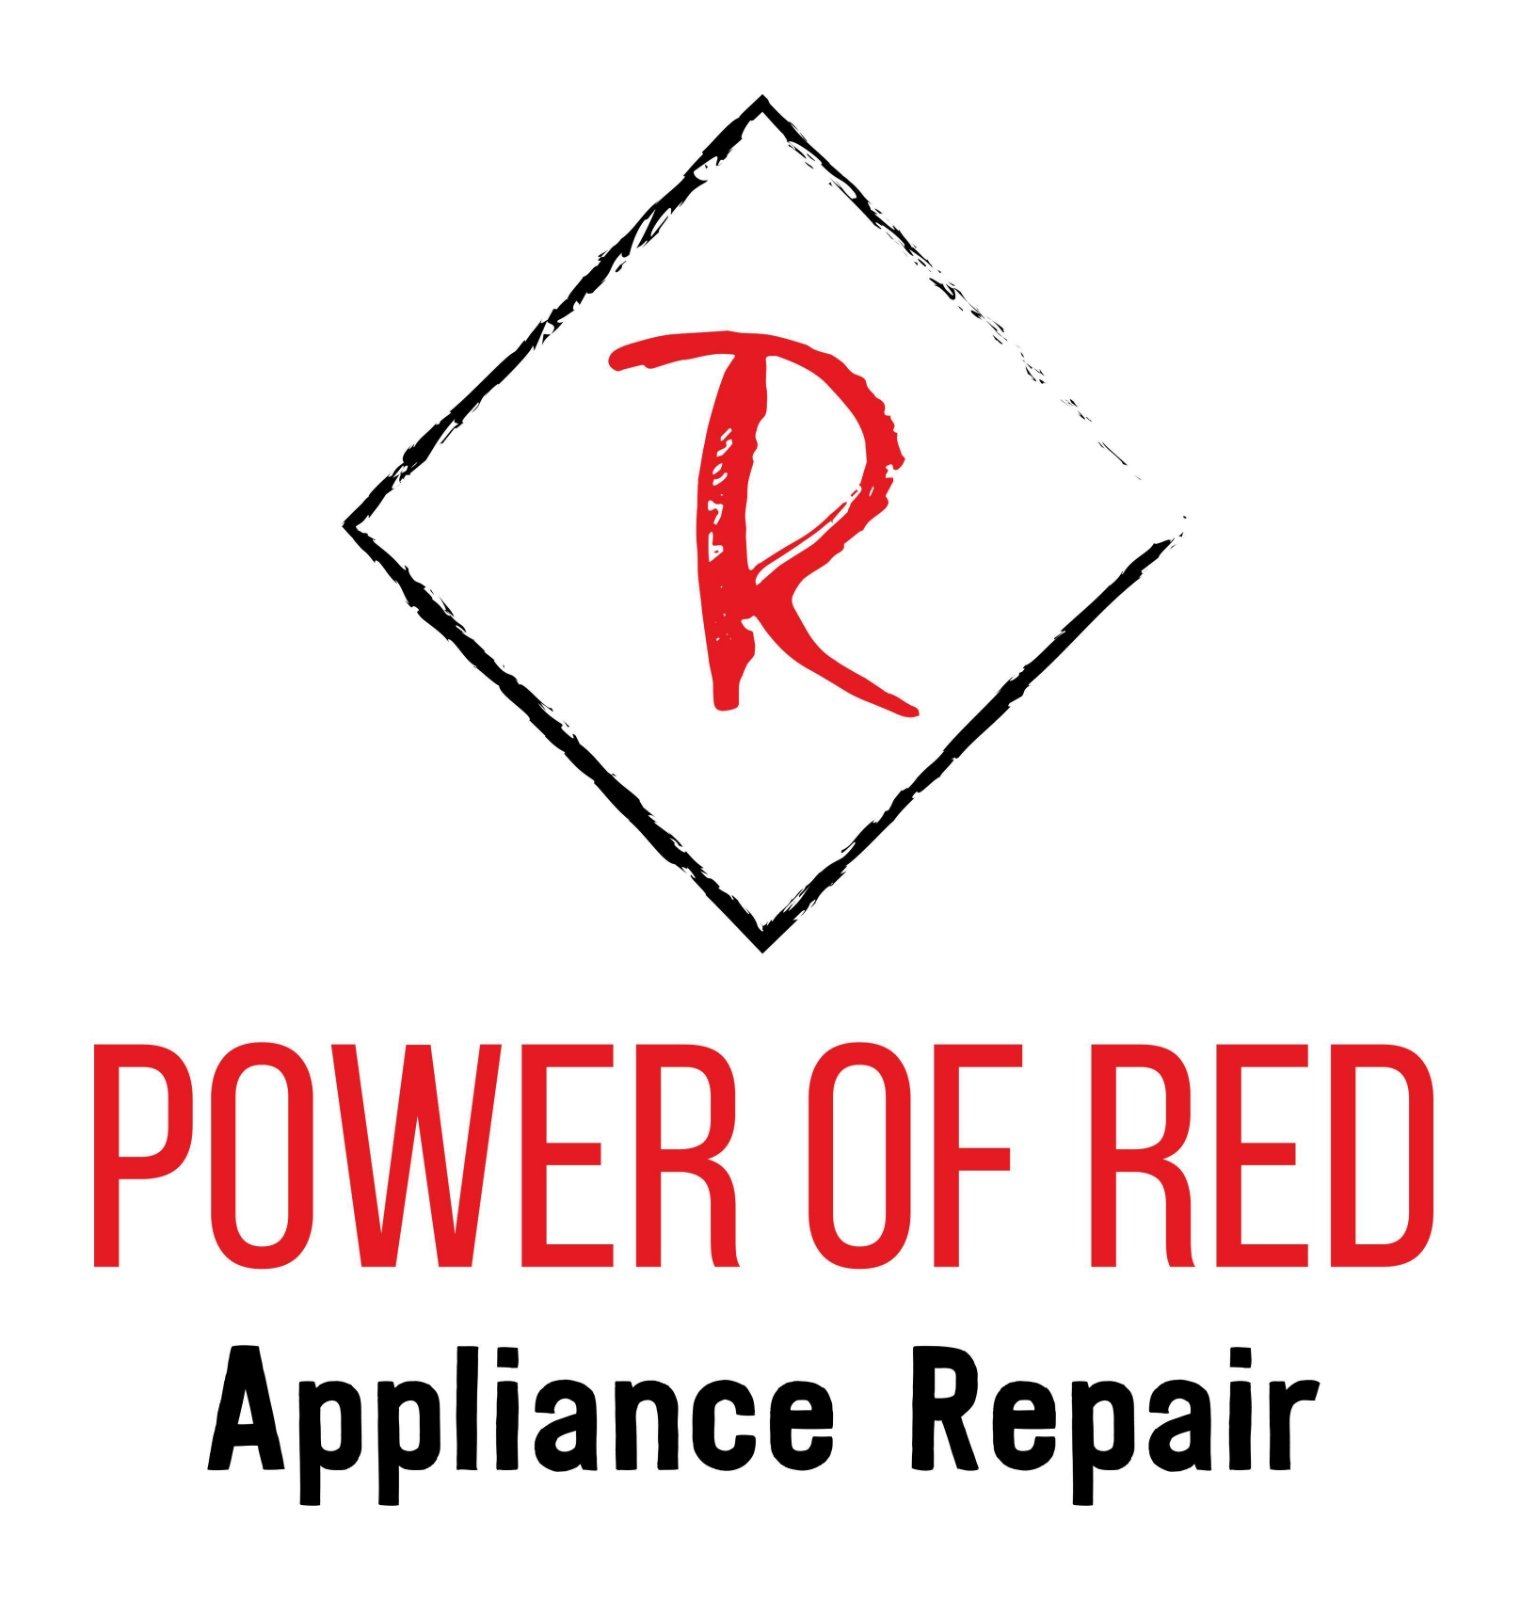 The Power of Red Appliance Repair Logo